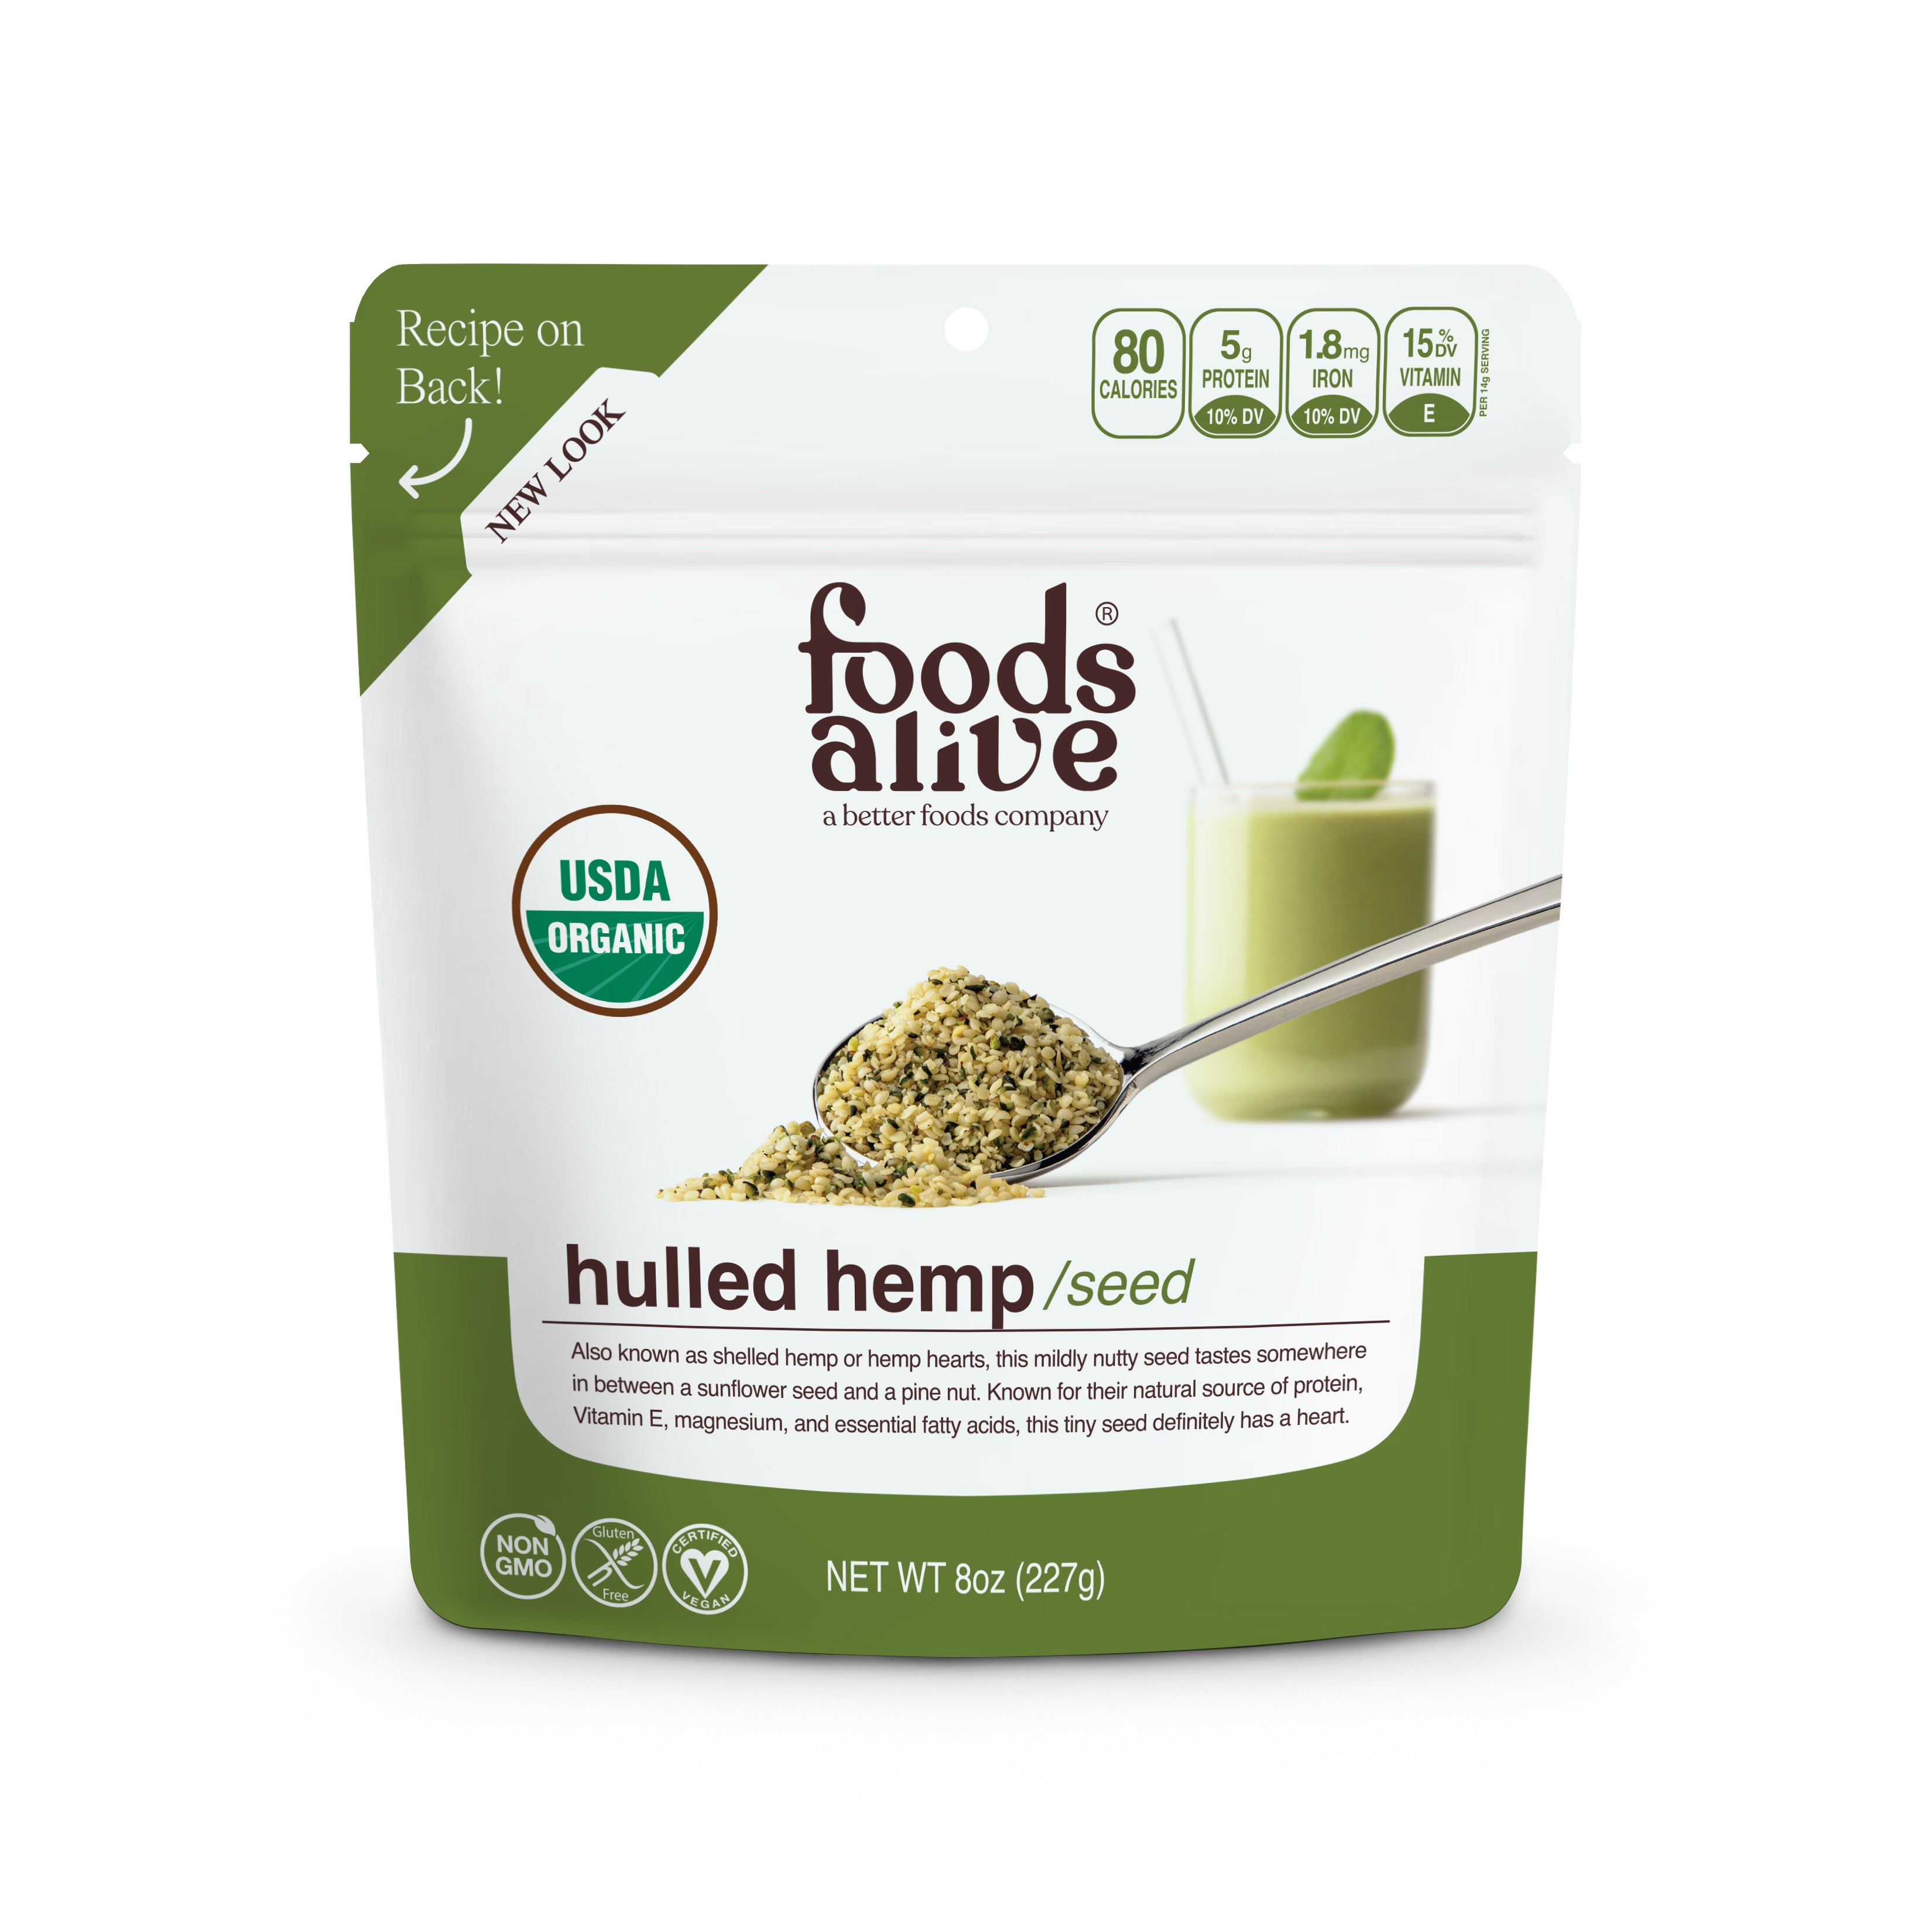 Hemp Seeds Are Ridiculously Healthy: Start Cooking with Them